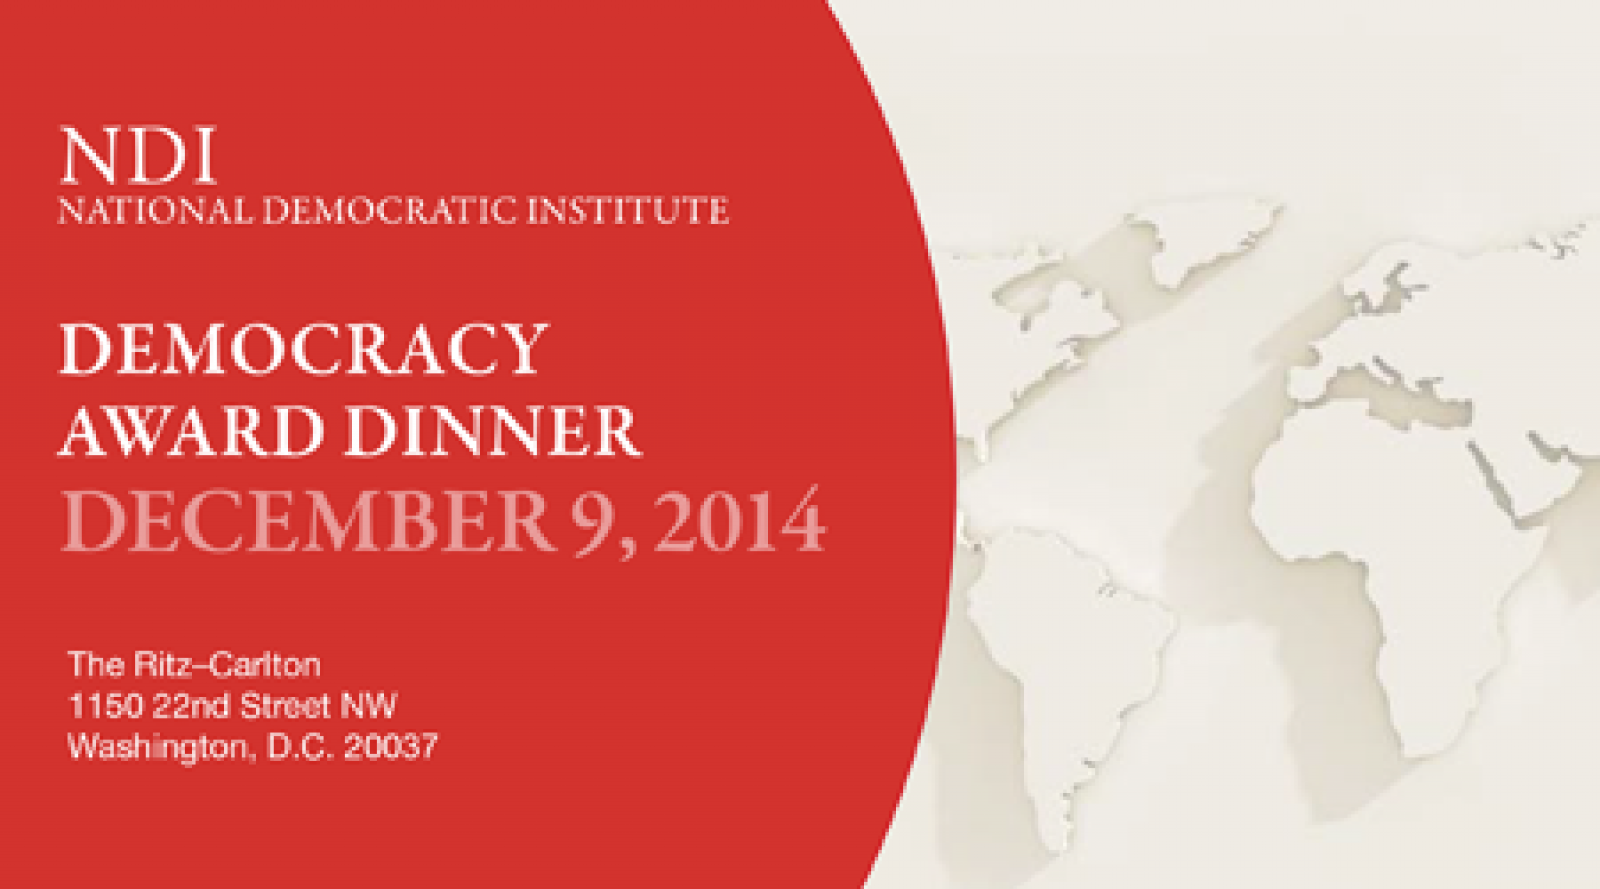 Vice President Biden to Deliver Remarks to NDI Award Dinner; Ukrainian Activists to be Honored